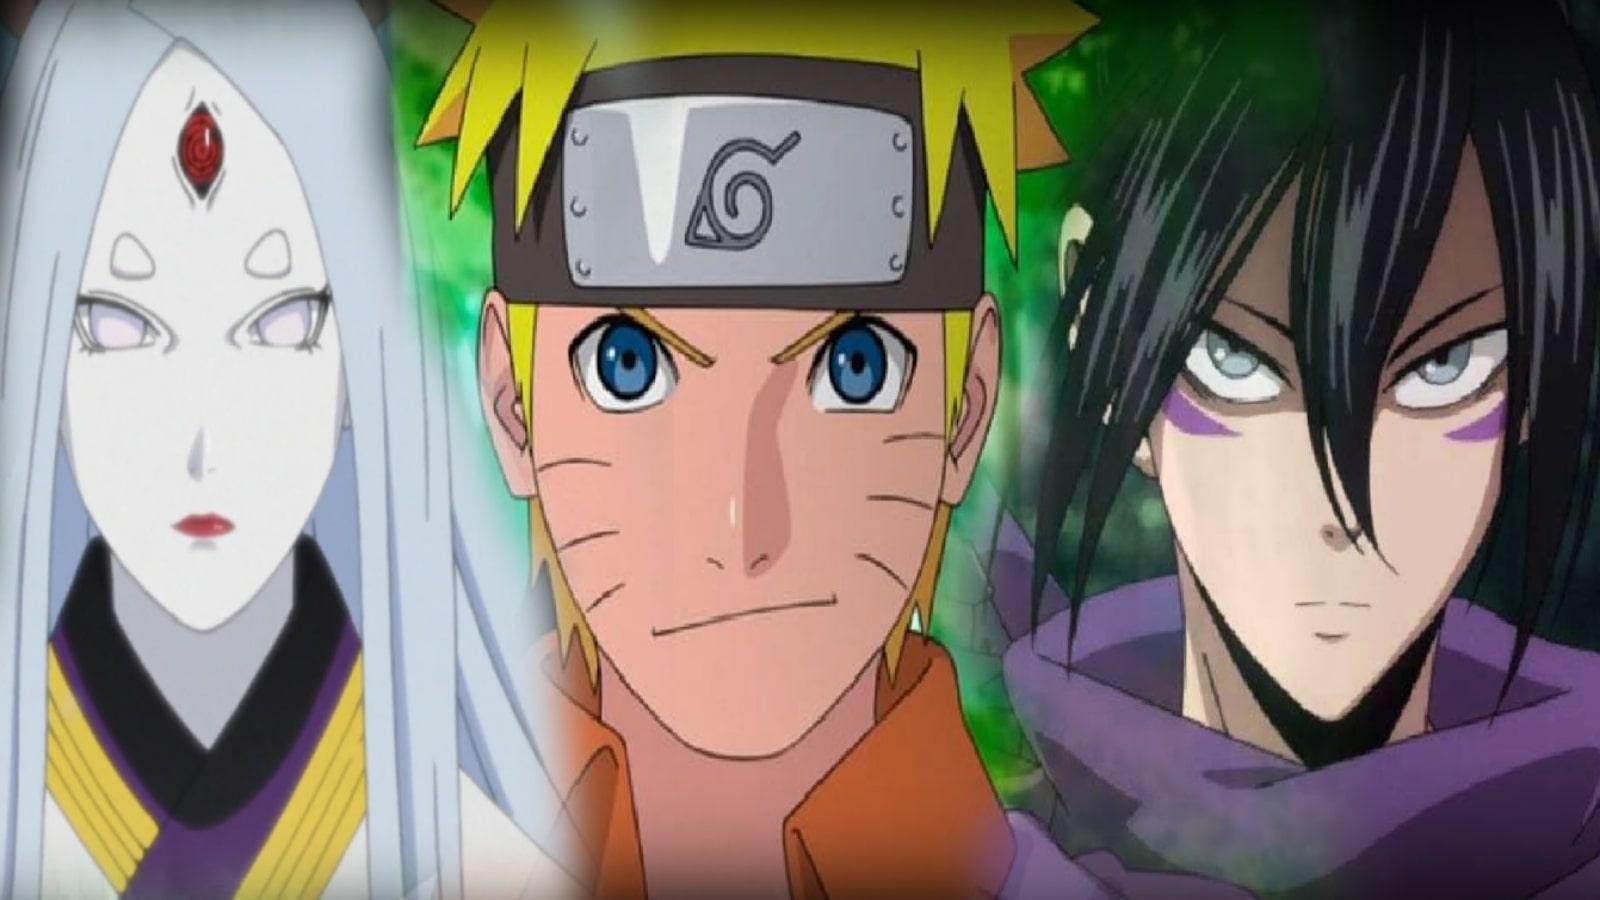 Anime ninjas which can beat Naruto